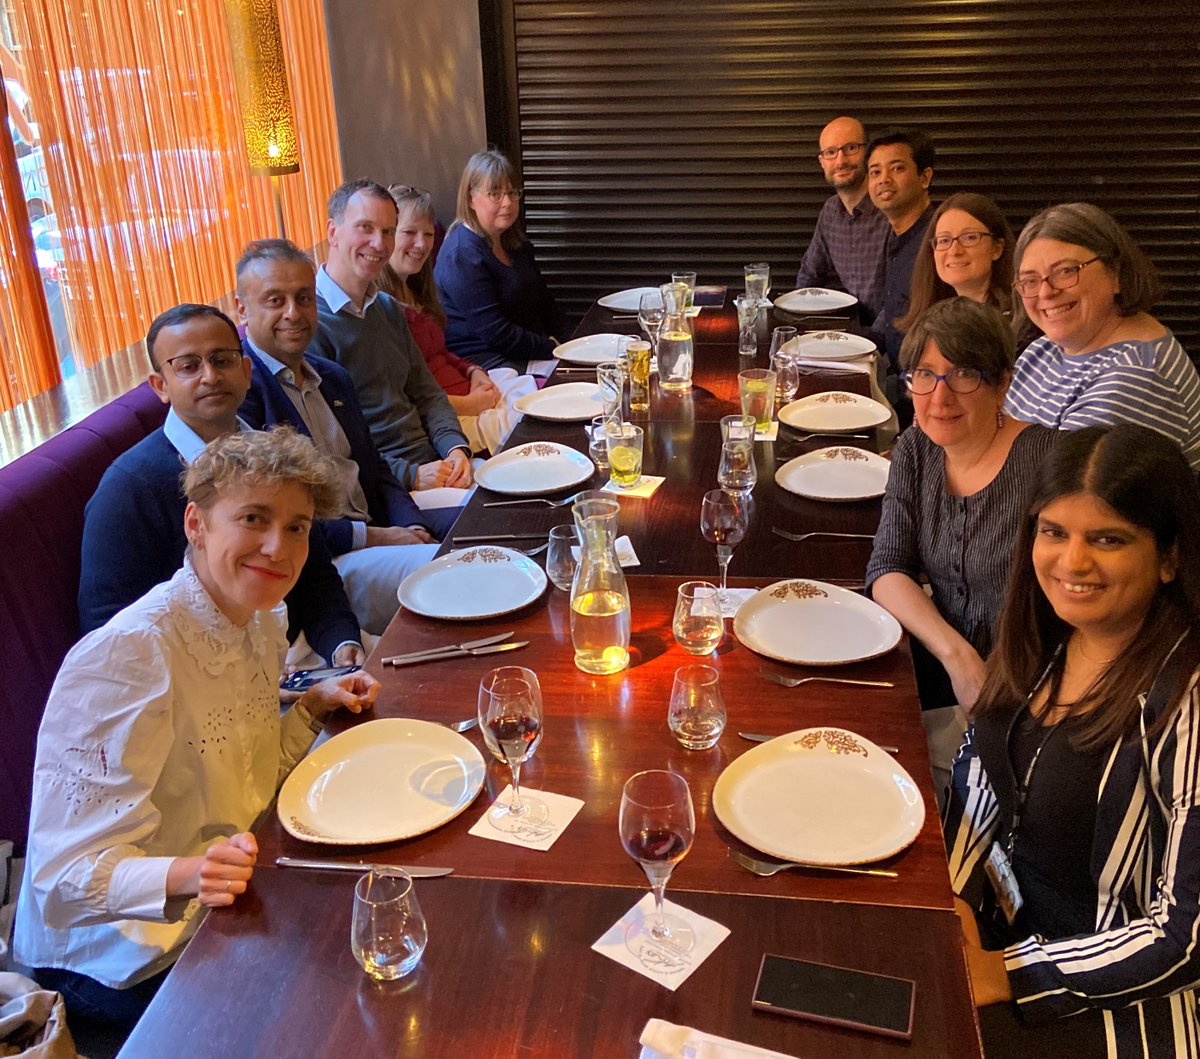 Congratulations @j_wolffsohn again for fantastic Glenn A. Fry award for research excellence by American Academy of Optometry (AAO) and American Academy of Optometry Foundation (AAOF) @aaopt . @AstonOptometry staff celebrated with a huge toast #reseach #ocularsurface #contactlens